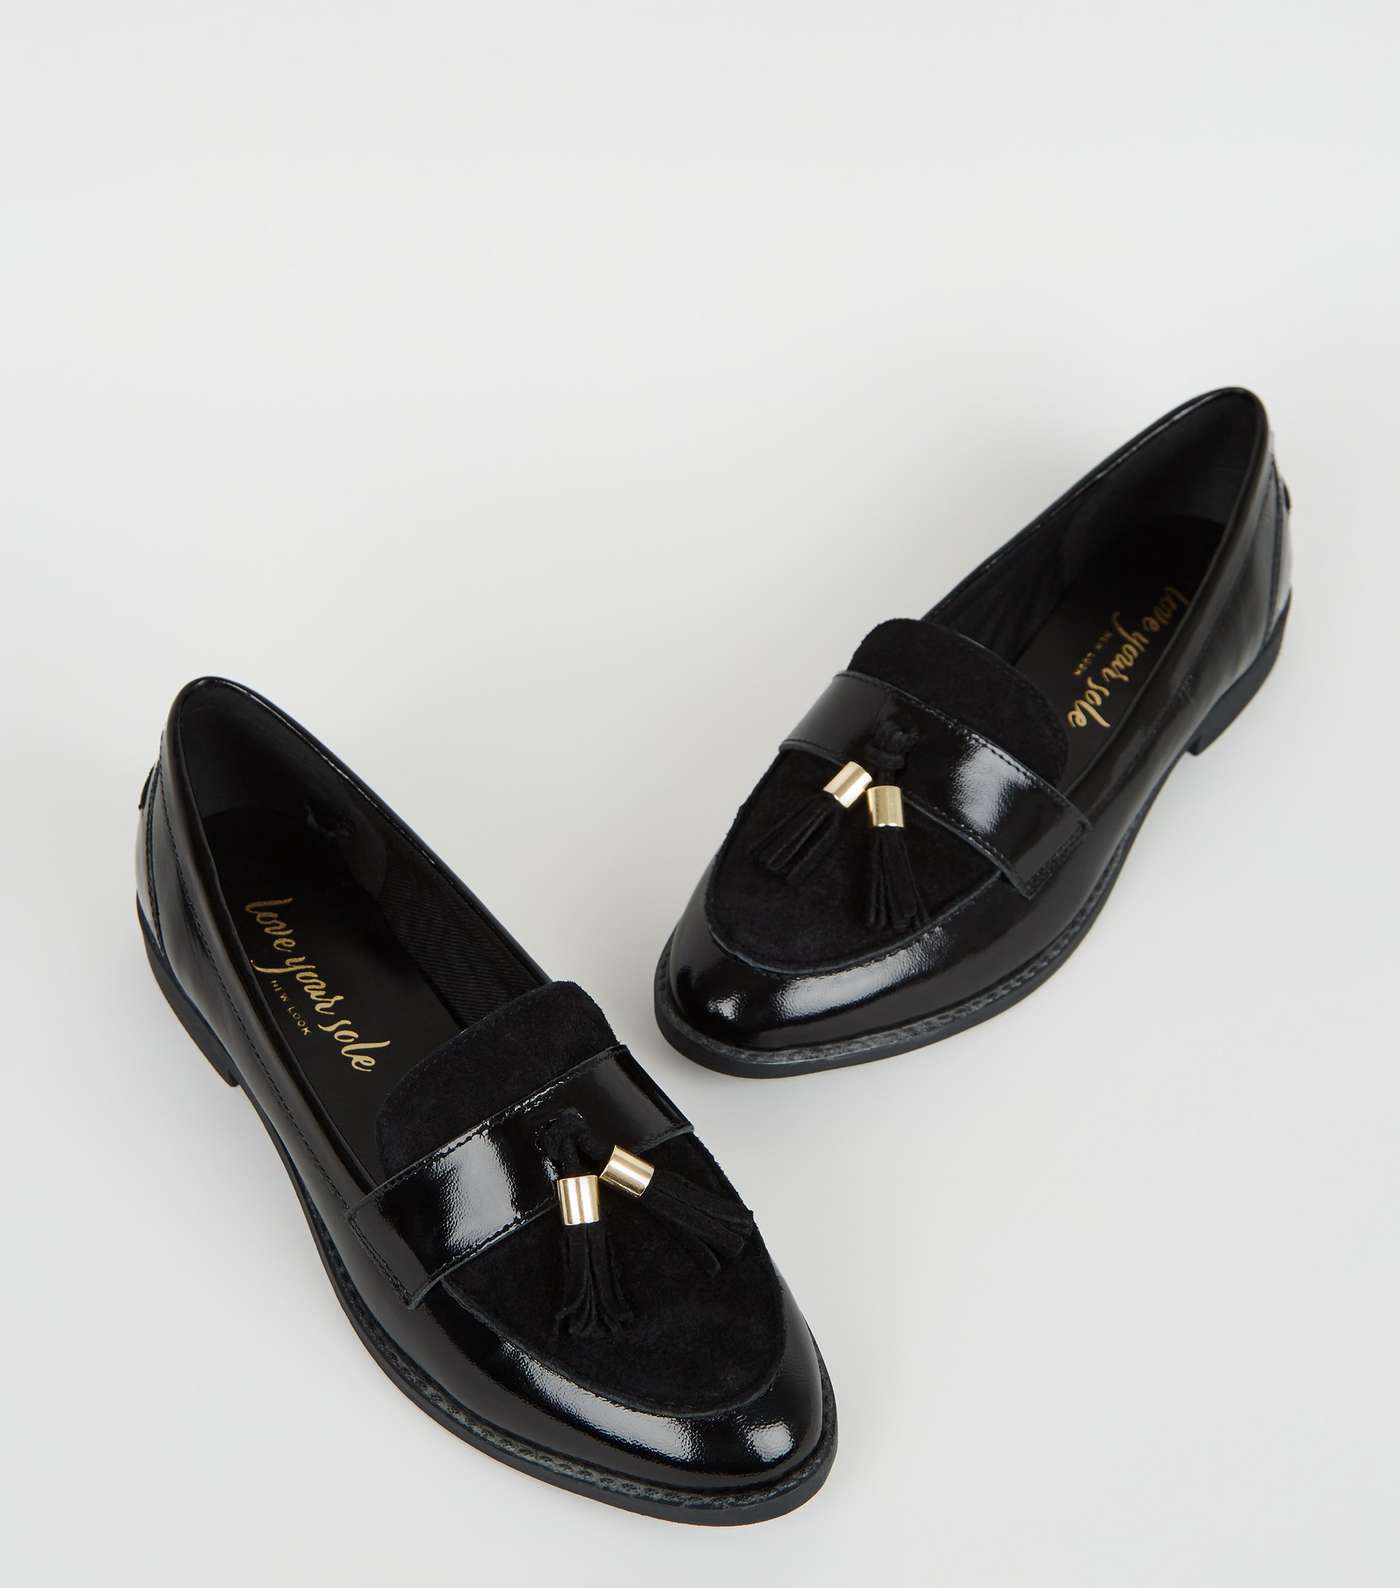 Black Suede and Leather Tassel Trim Loafers Image 3